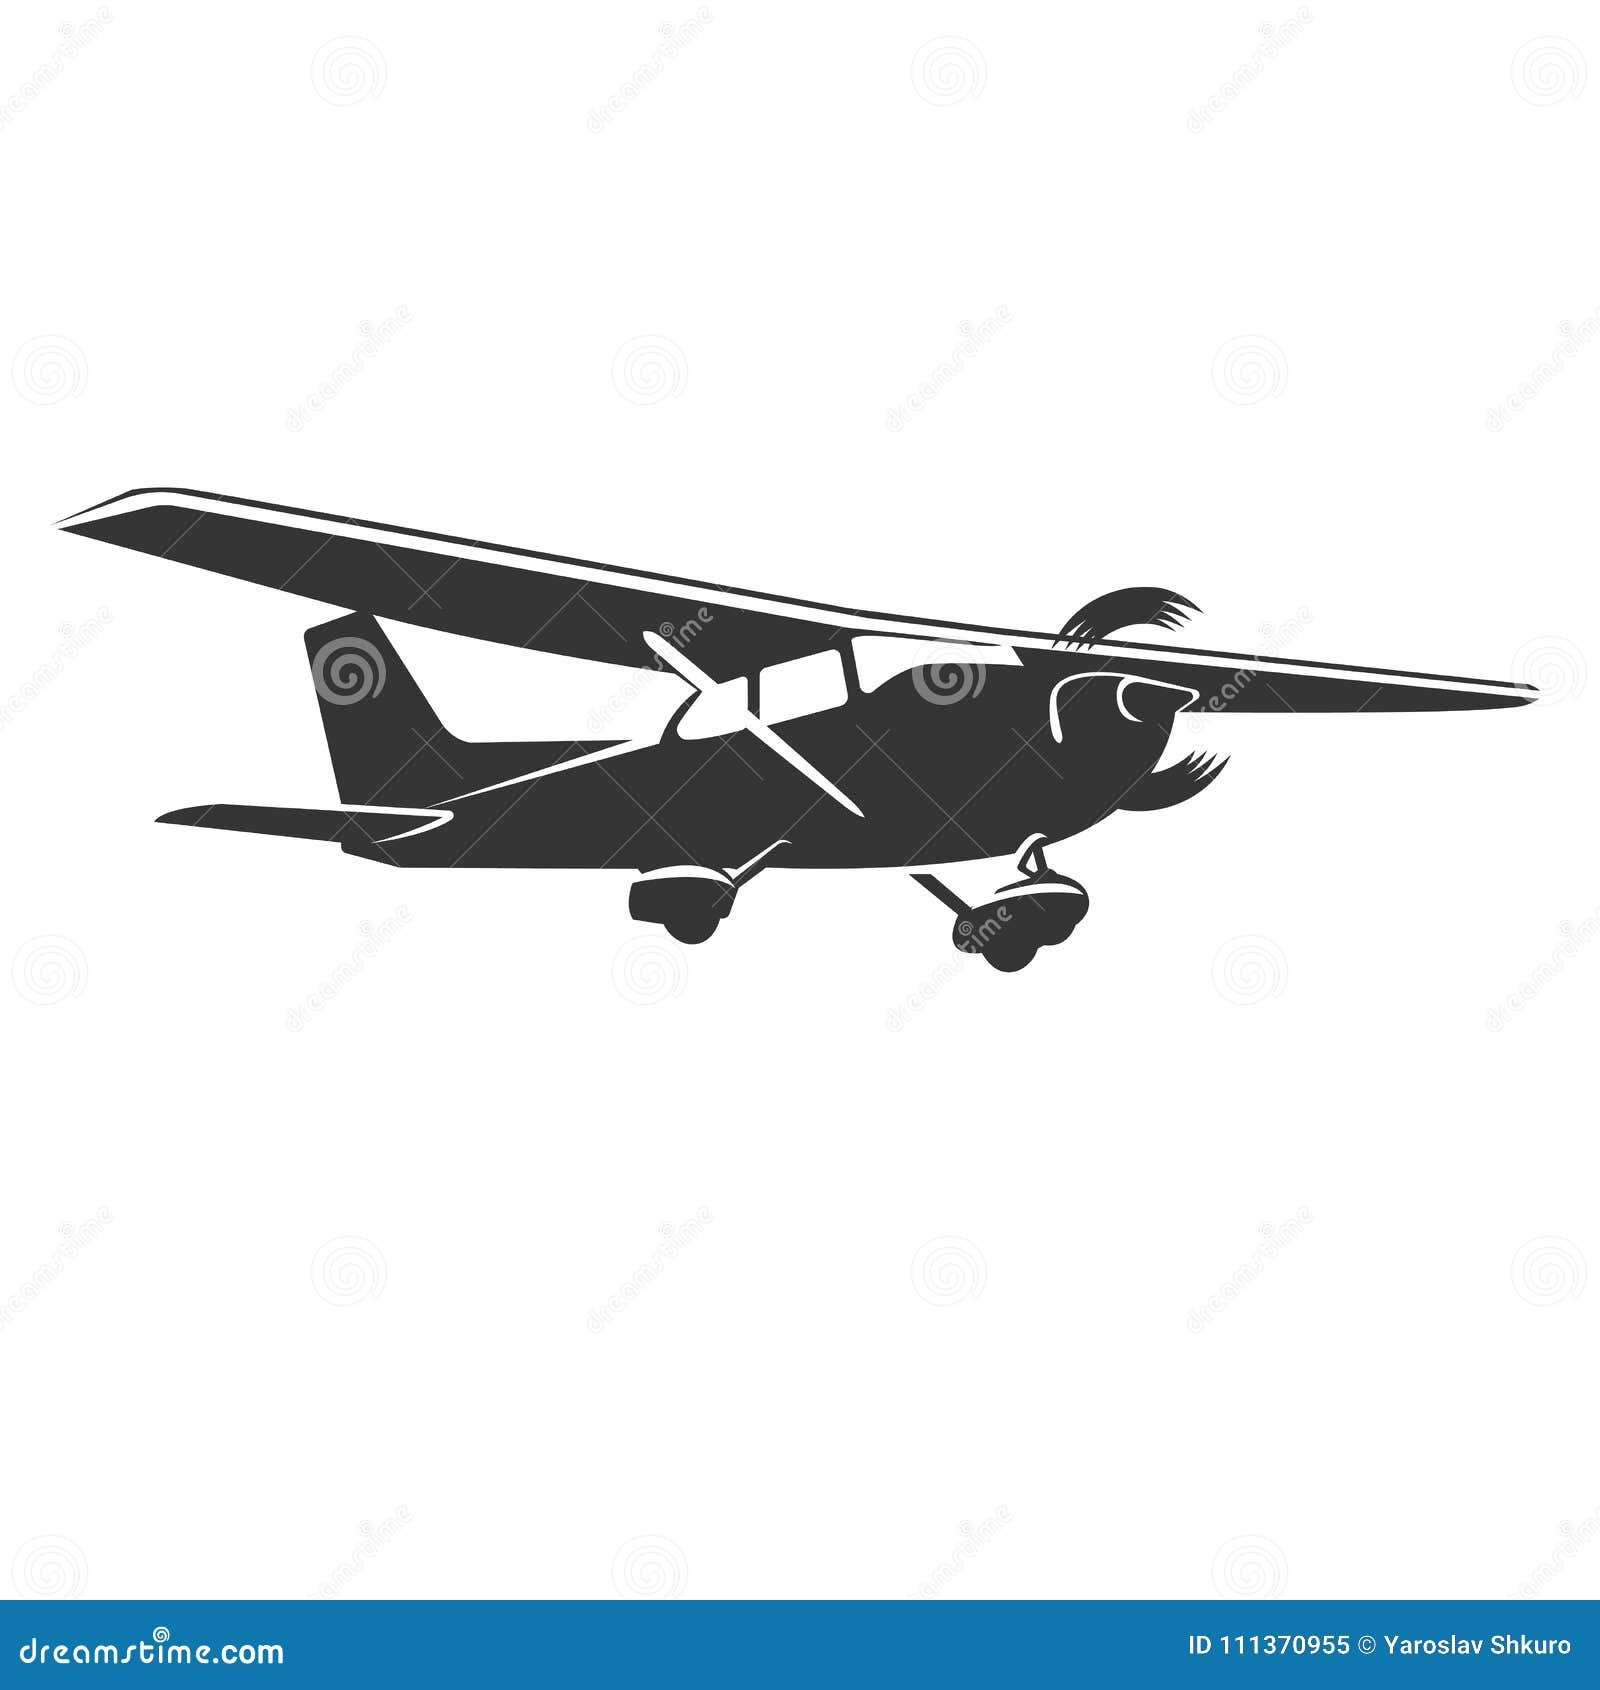 small plane  . single engine propelled aircraft.